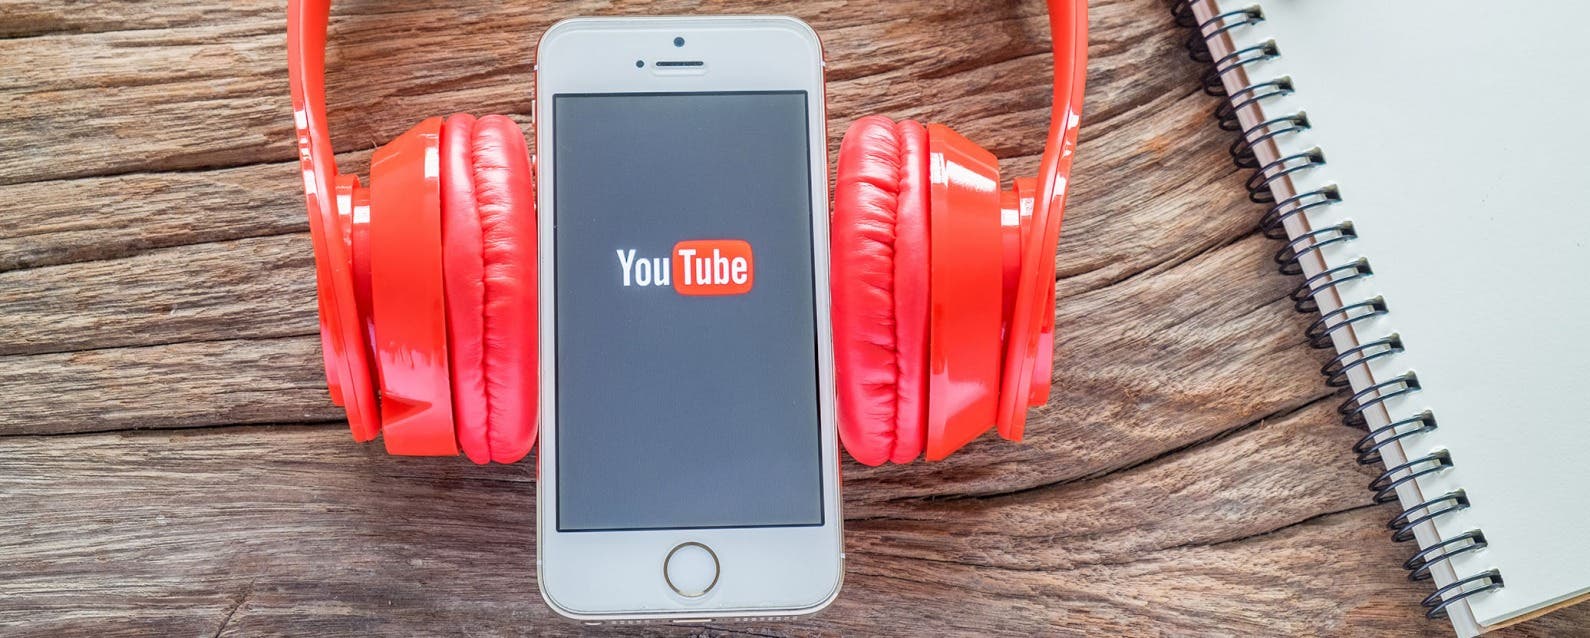 download song from youtube to iphone